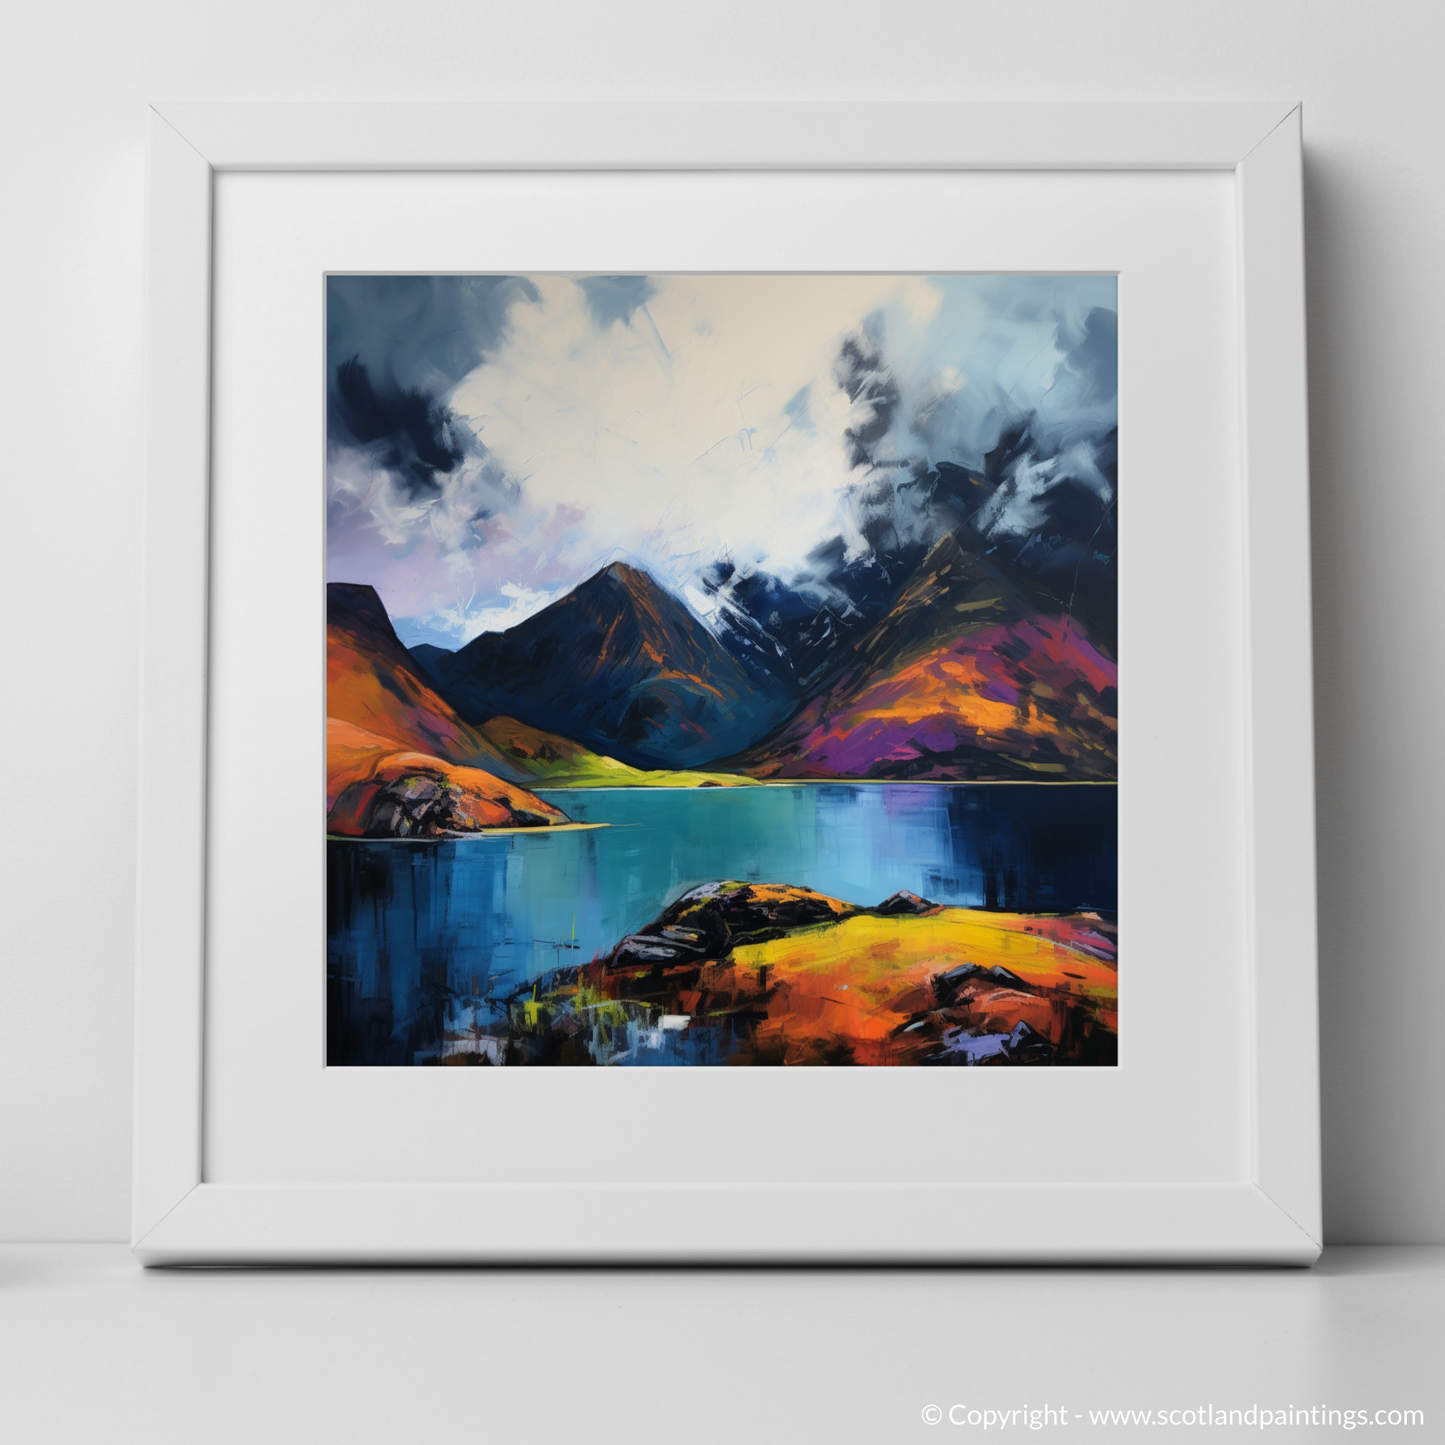 Art Print of Loch Coruisk with a stormy sky with a white frame